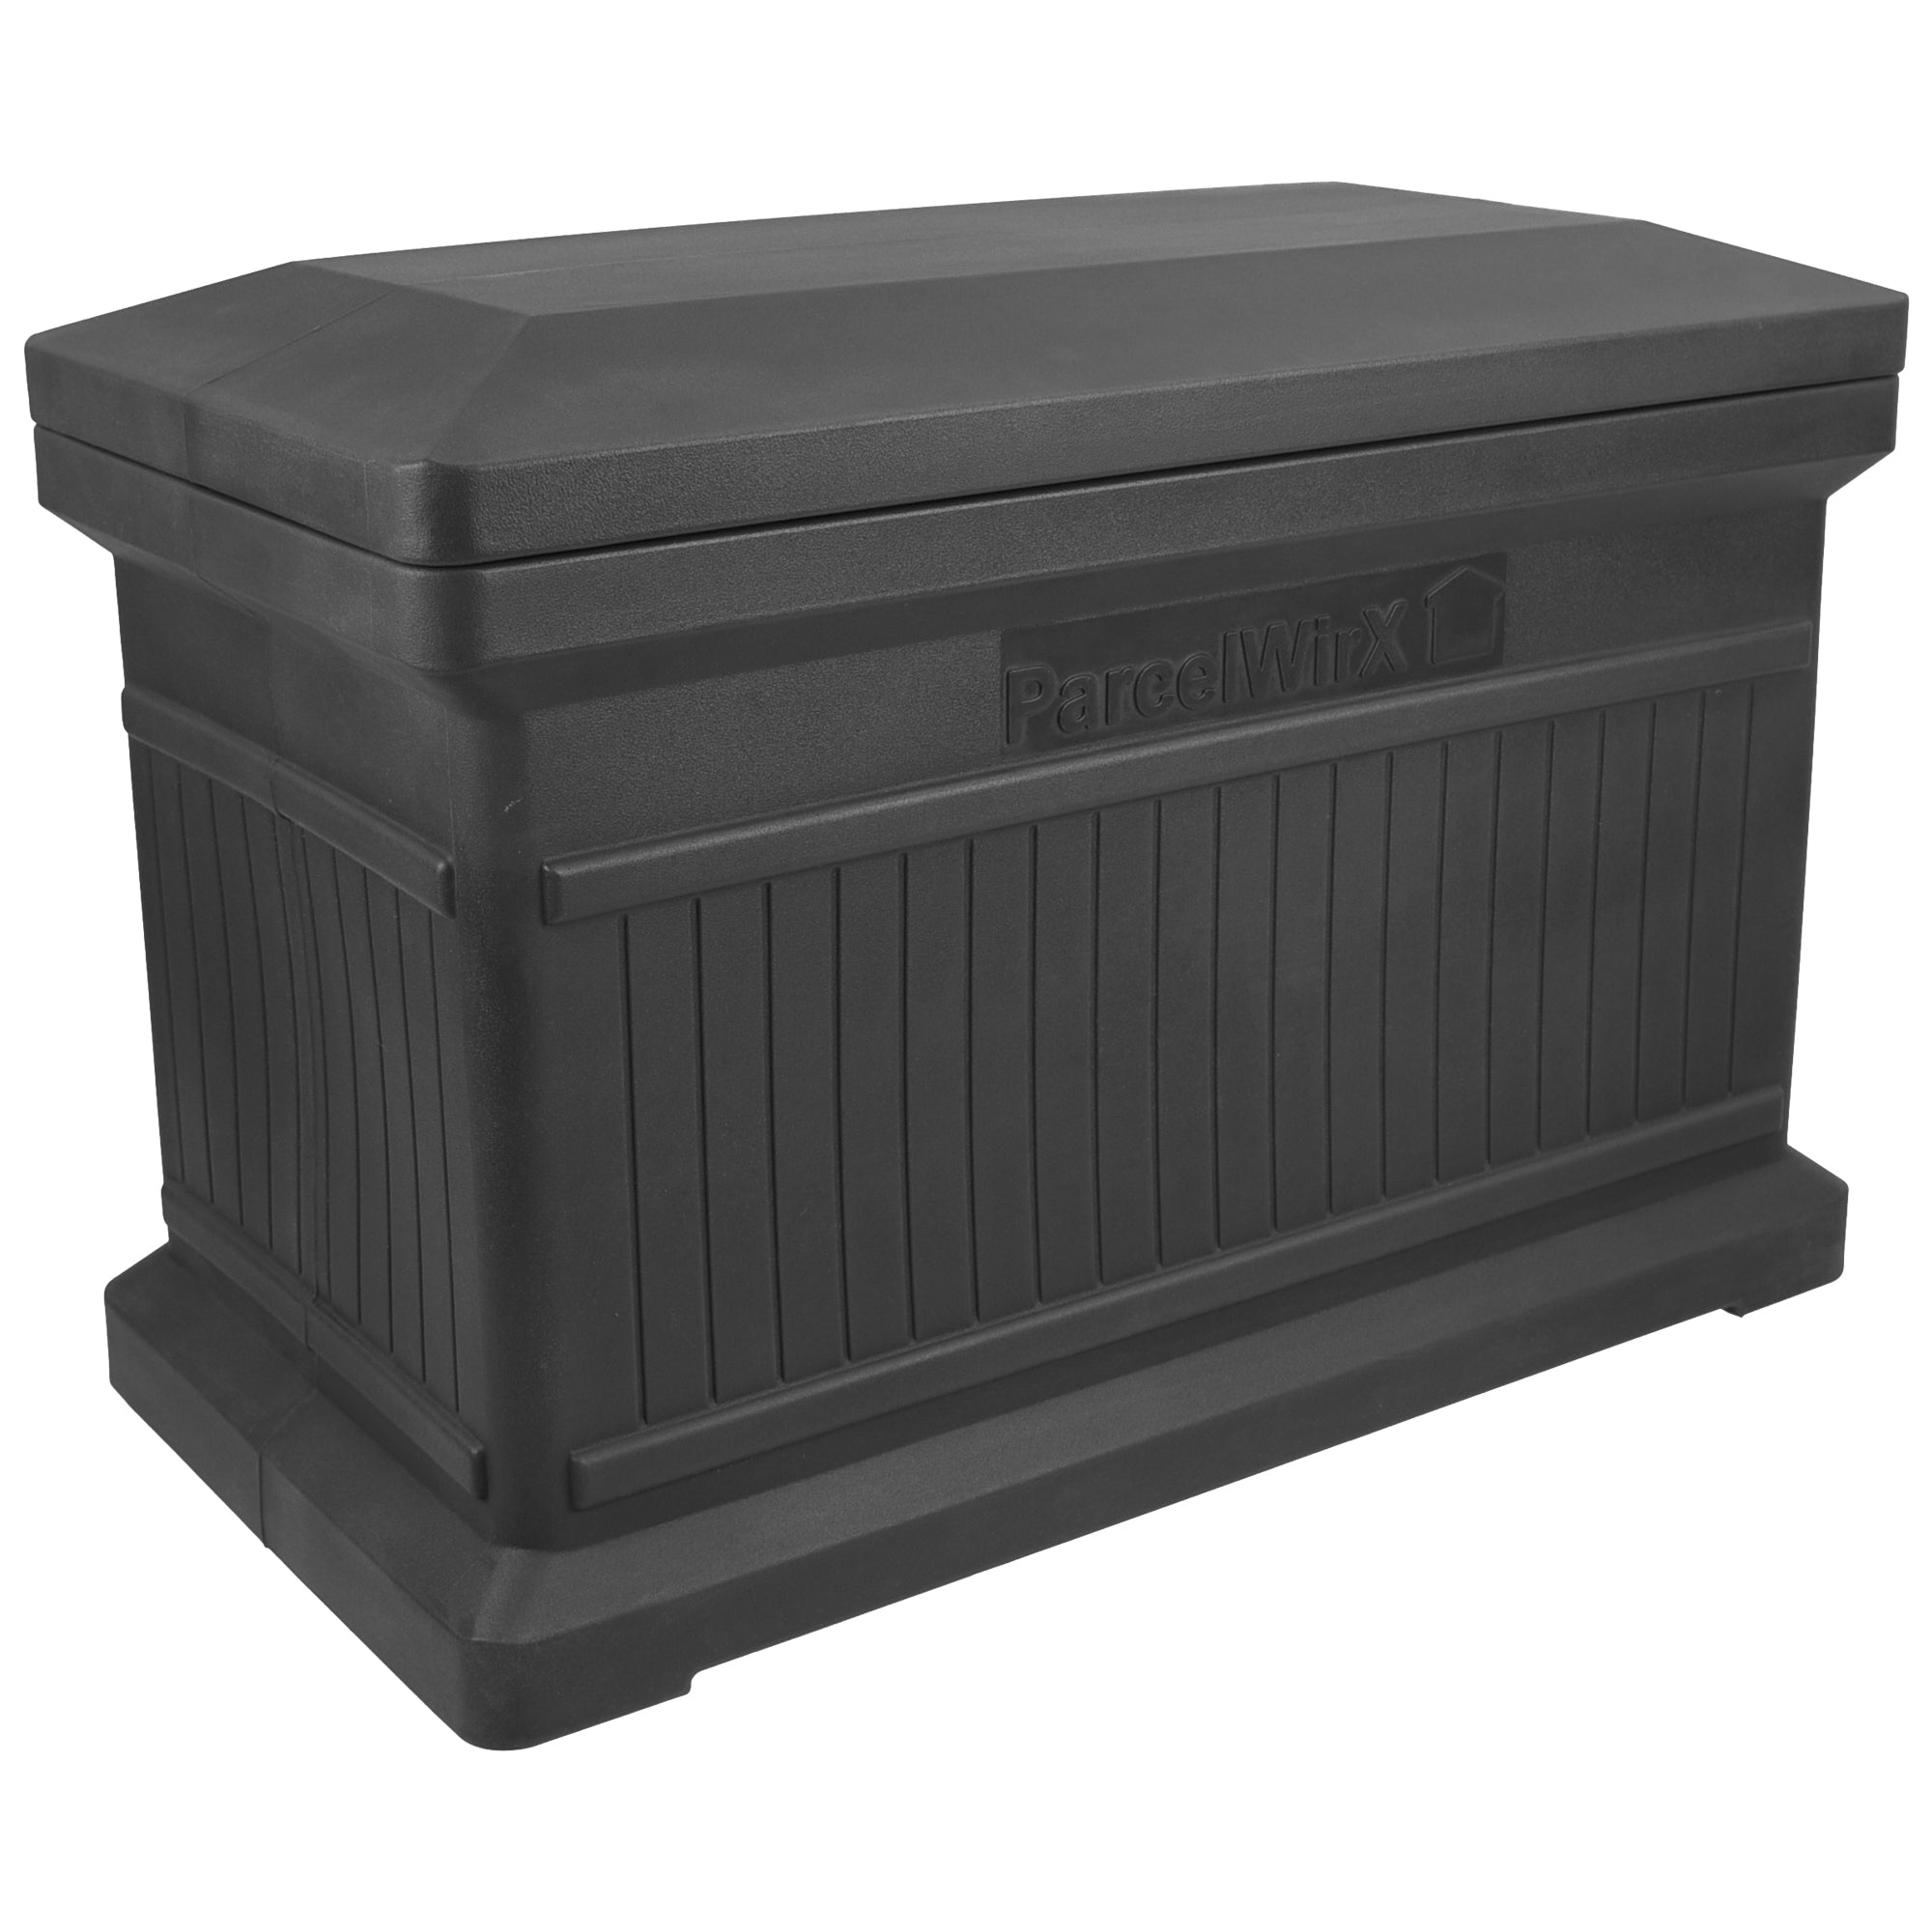 Graphite ParcelWirx horizontal standard from an angle with the lid on, white background